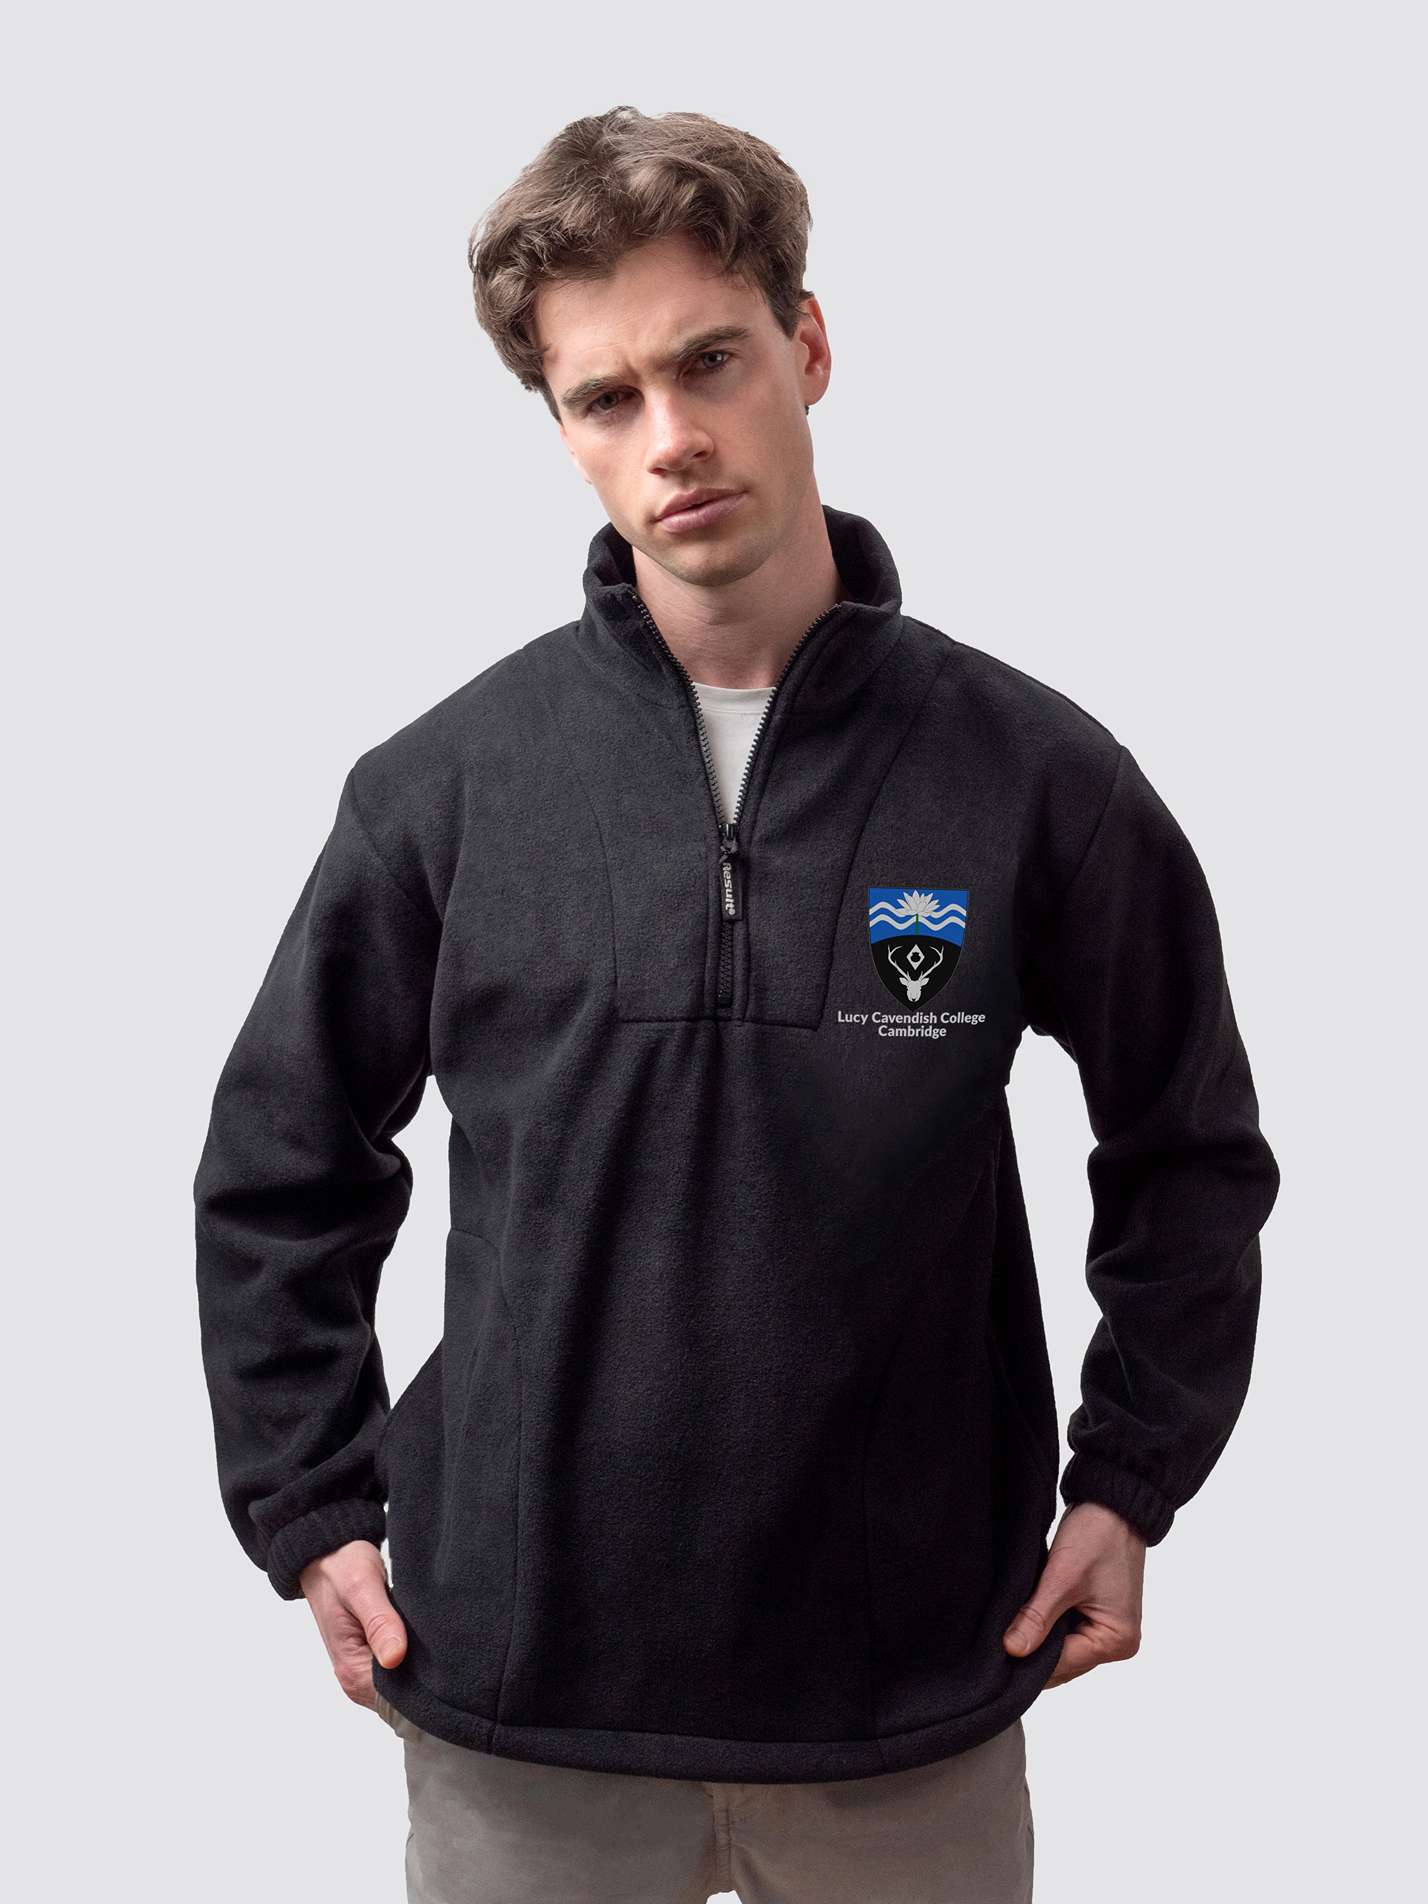 Cambridge university fleece, with custom embroidered initials and Lucy Cavendish crest